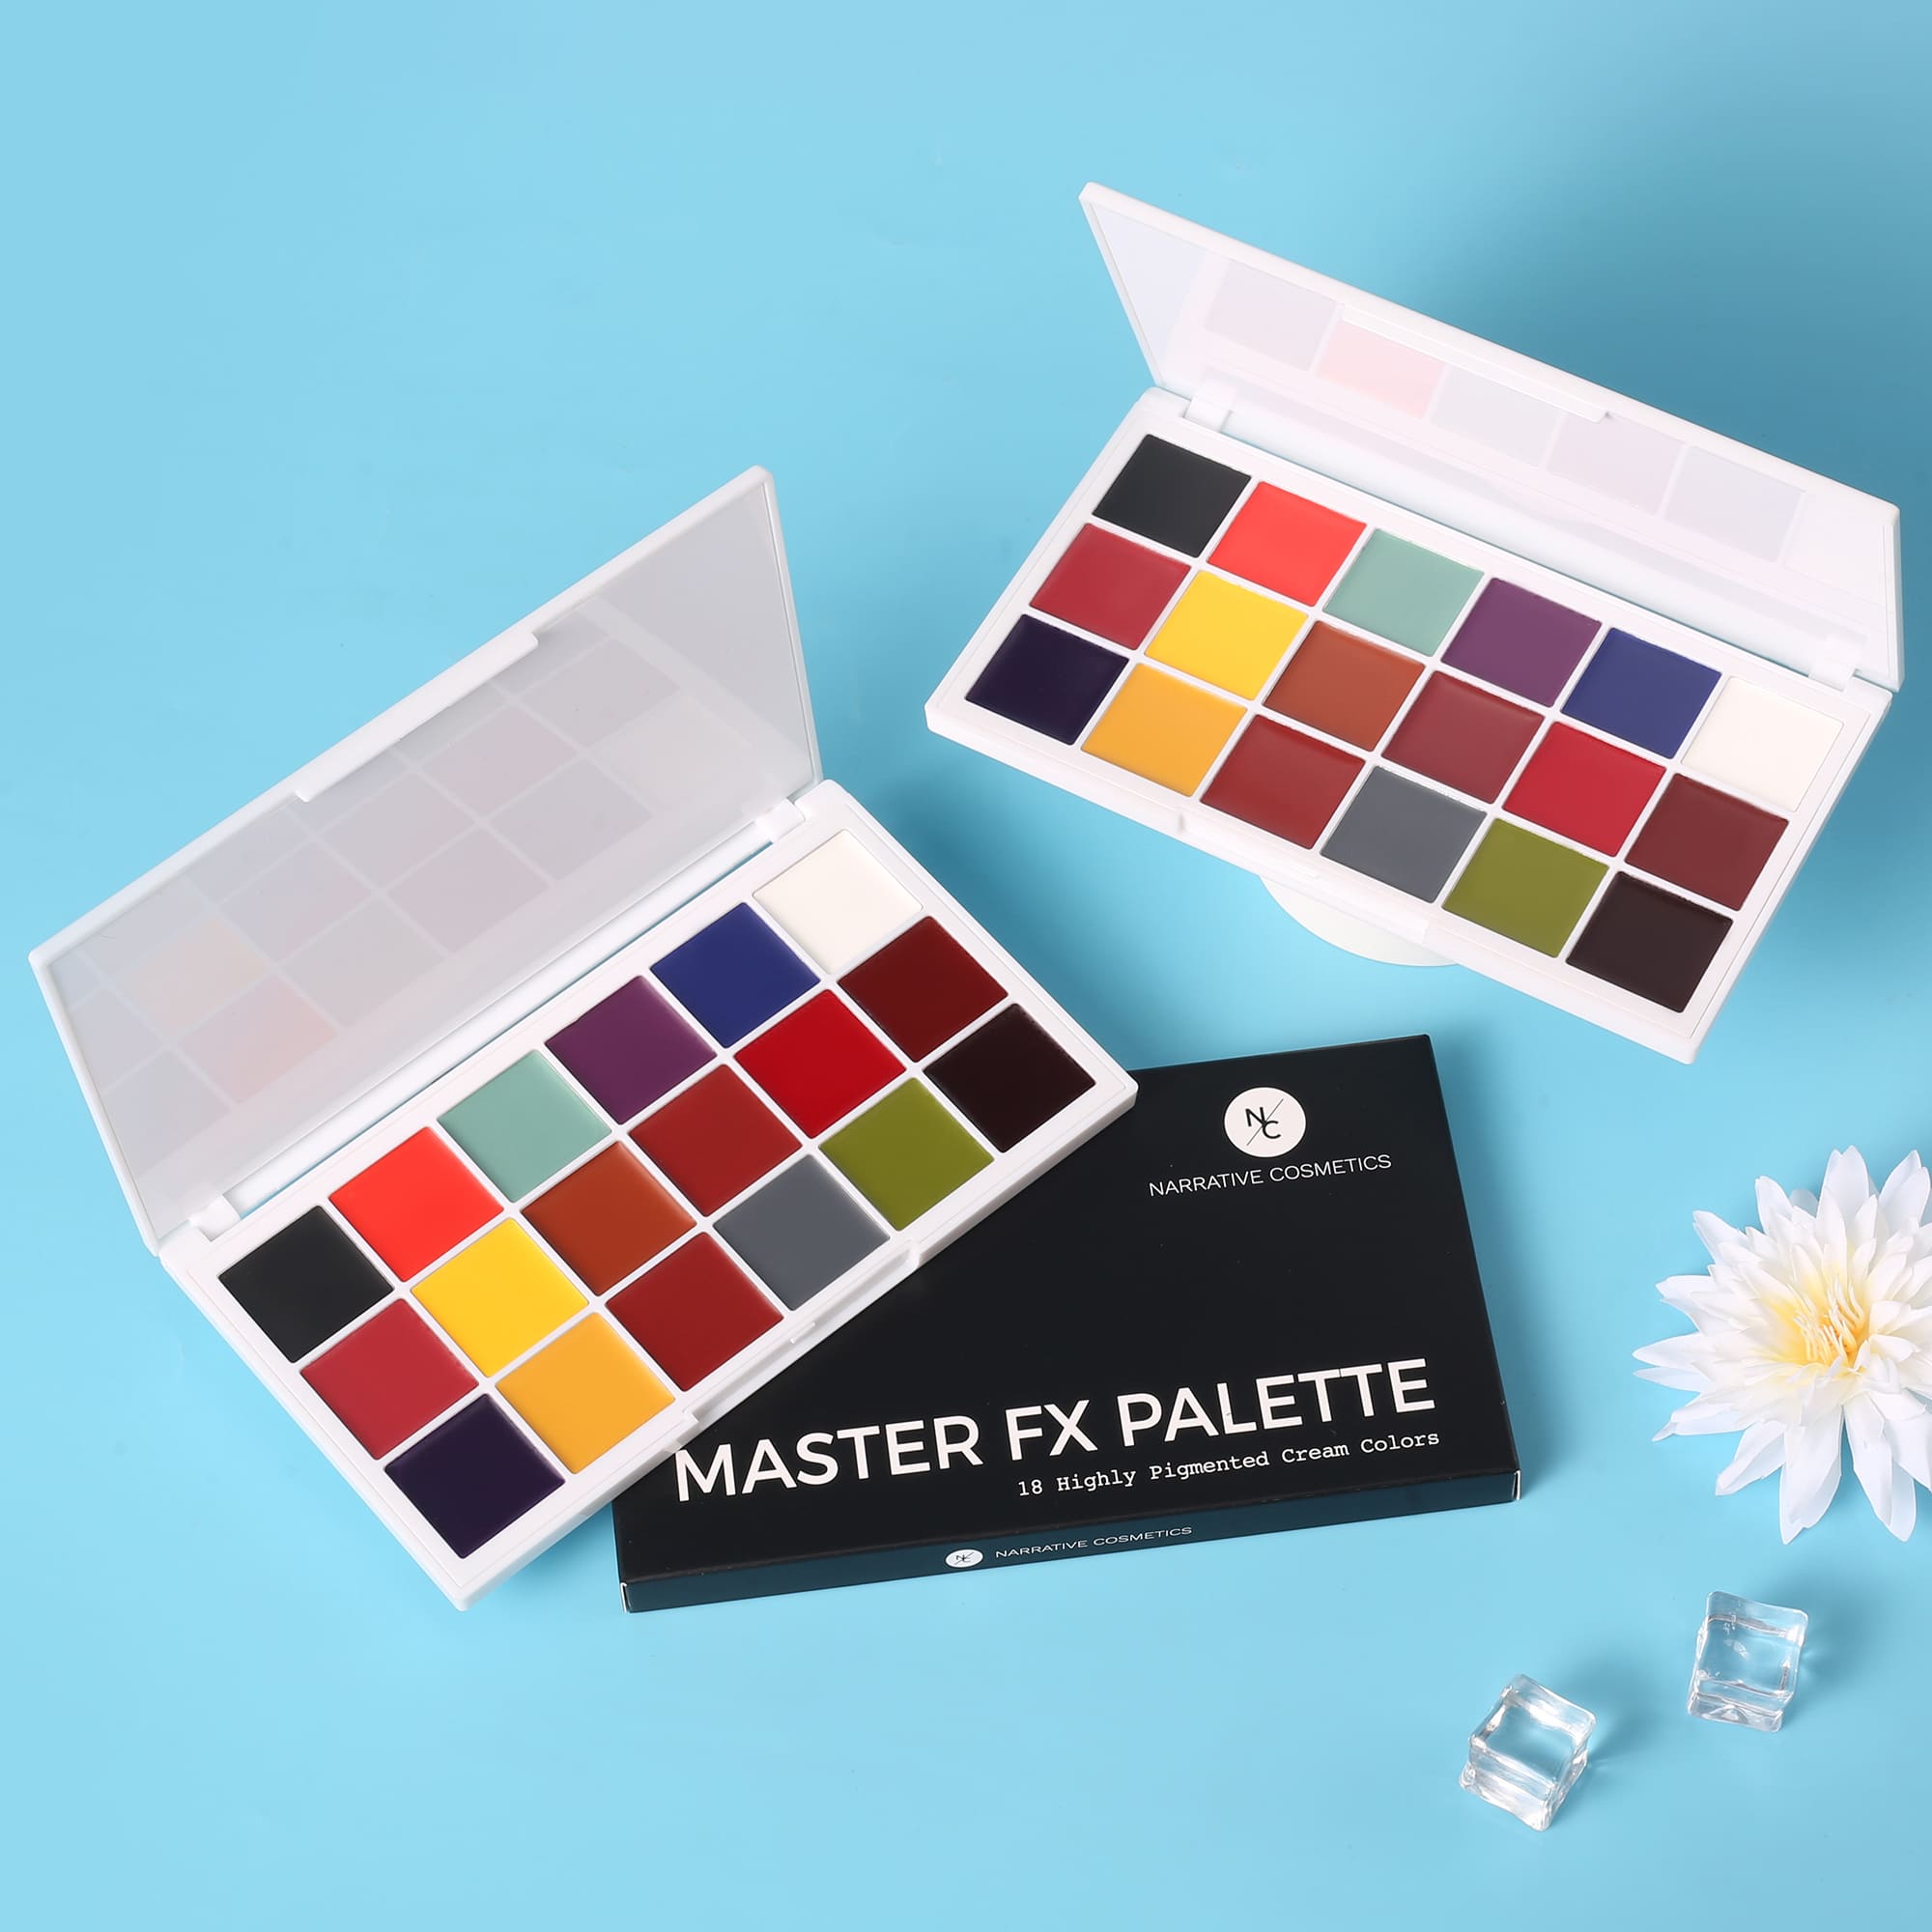 Narrative Cosmetics Master FX Palette, 18 Highly Pigmented Cream Colors,  Professional SFX Makeup Palette for the Stage, Film, Costumes, Cosplay